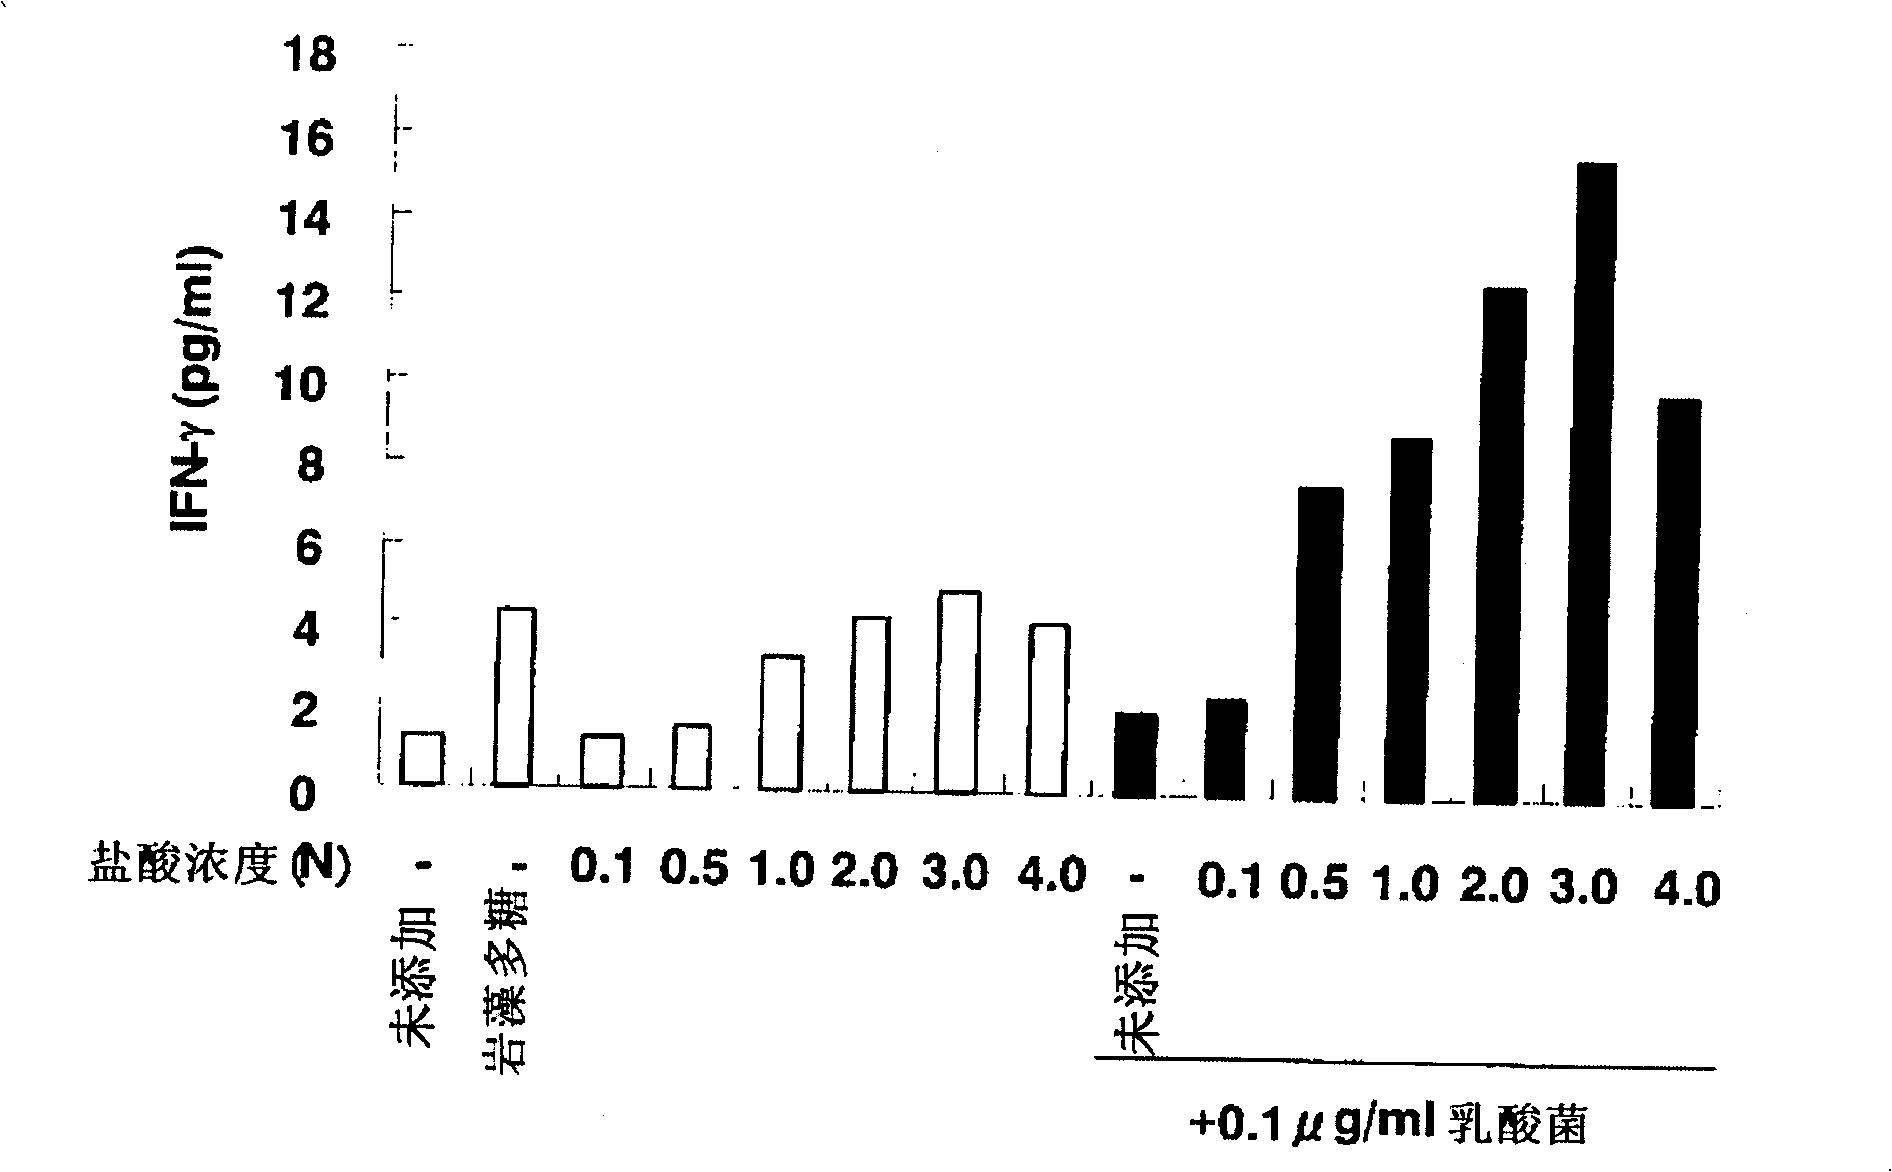 Composition containing fucoidan or fucoidan hydrolysate and immunopotentiating material